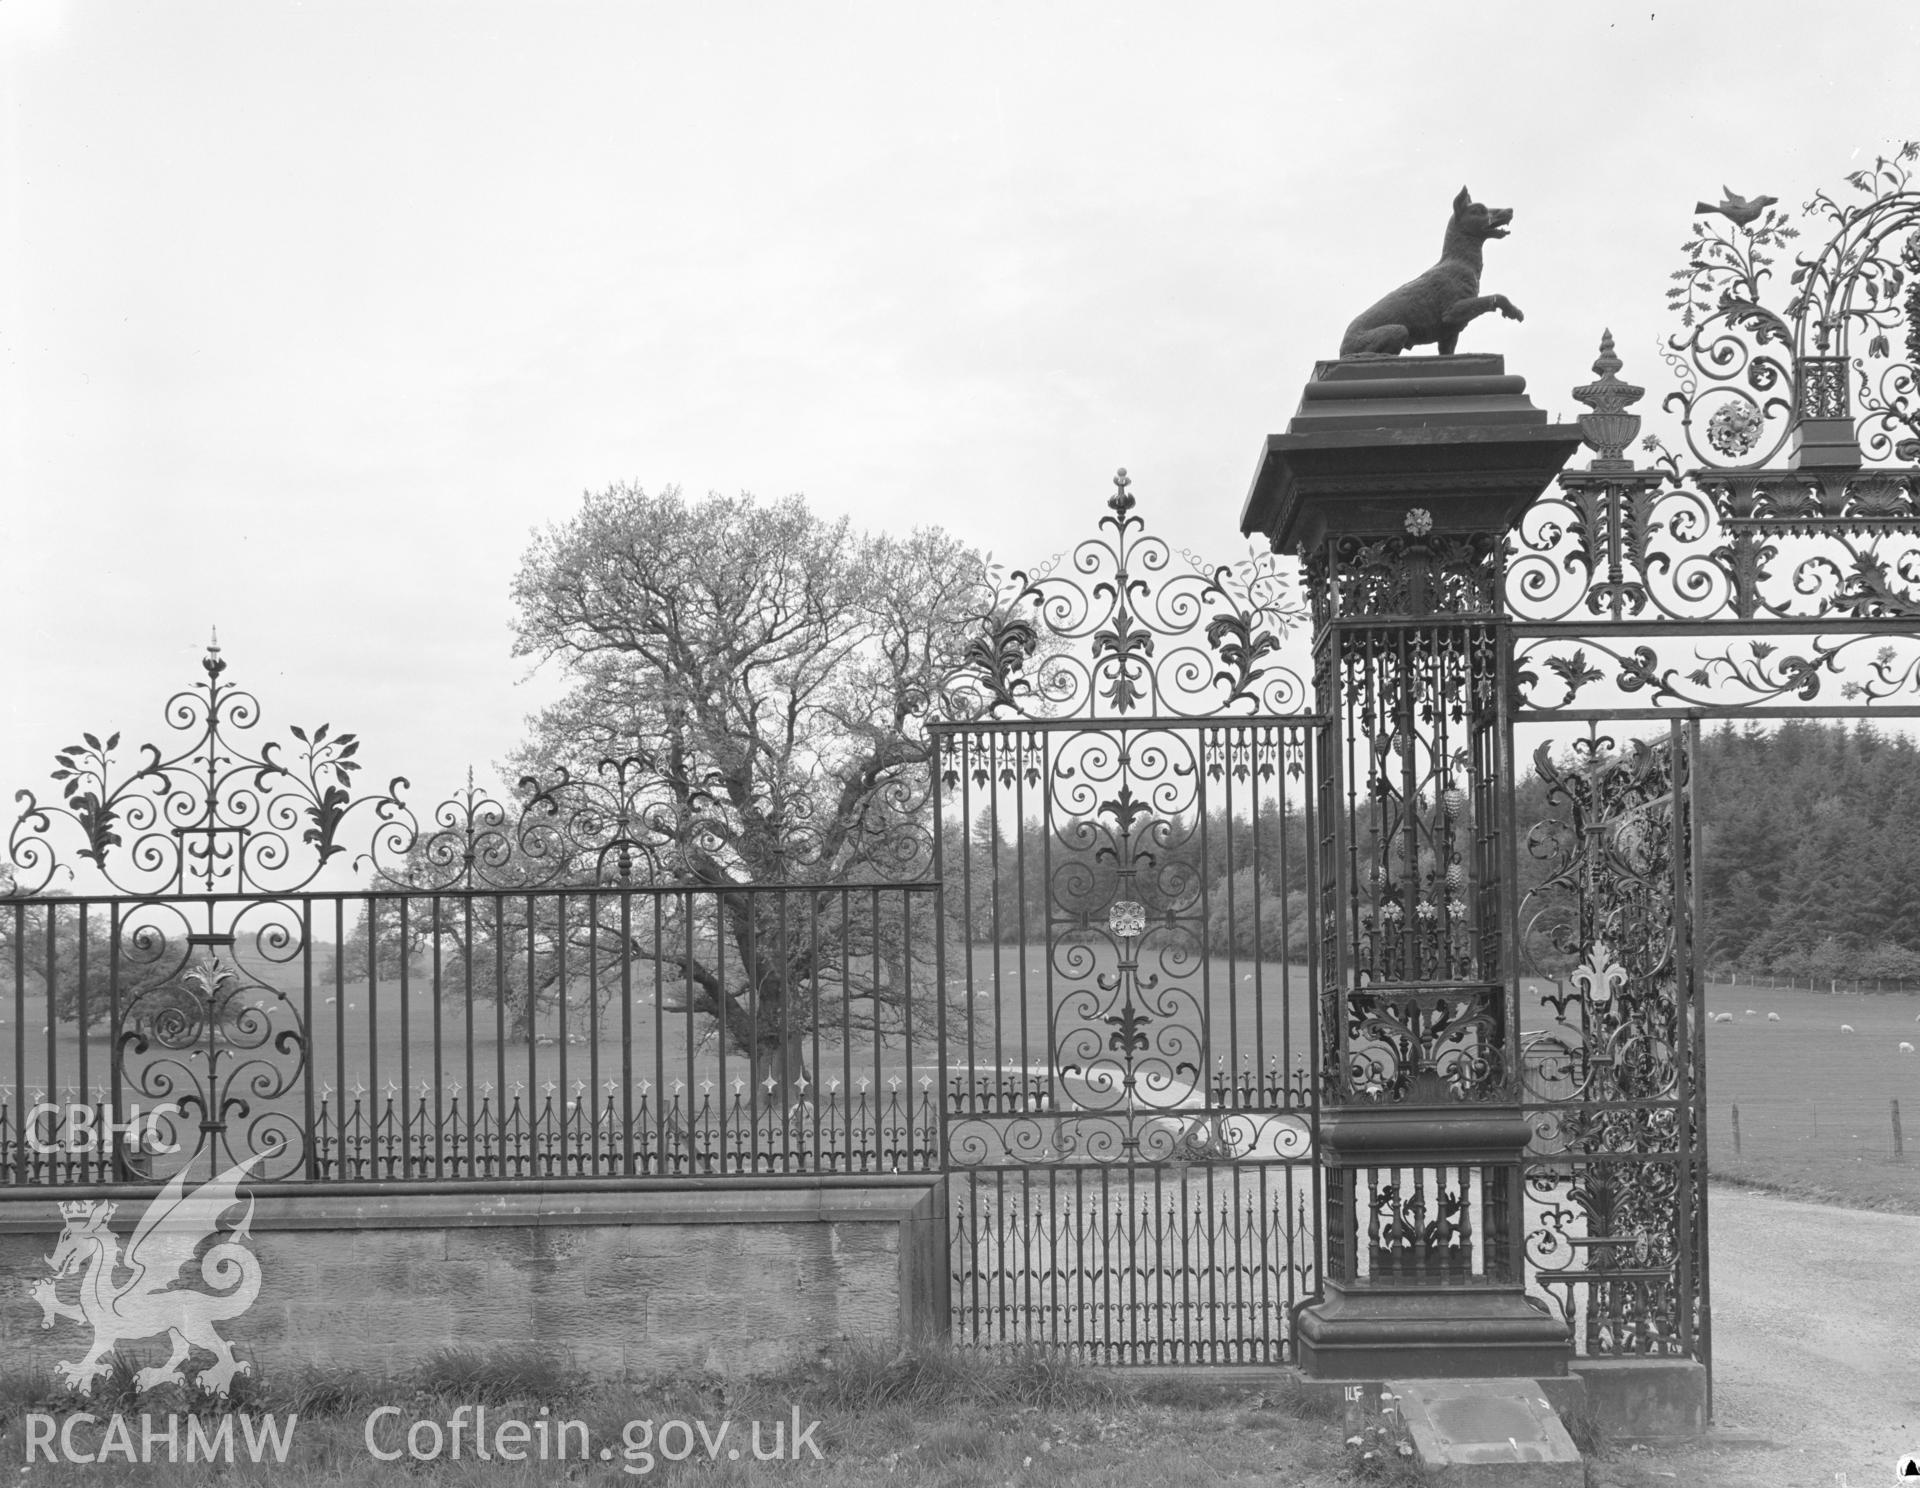 Digital copy of an acetate negative showing view of Chirk Castle gates taken by D.O.E. in 1977.